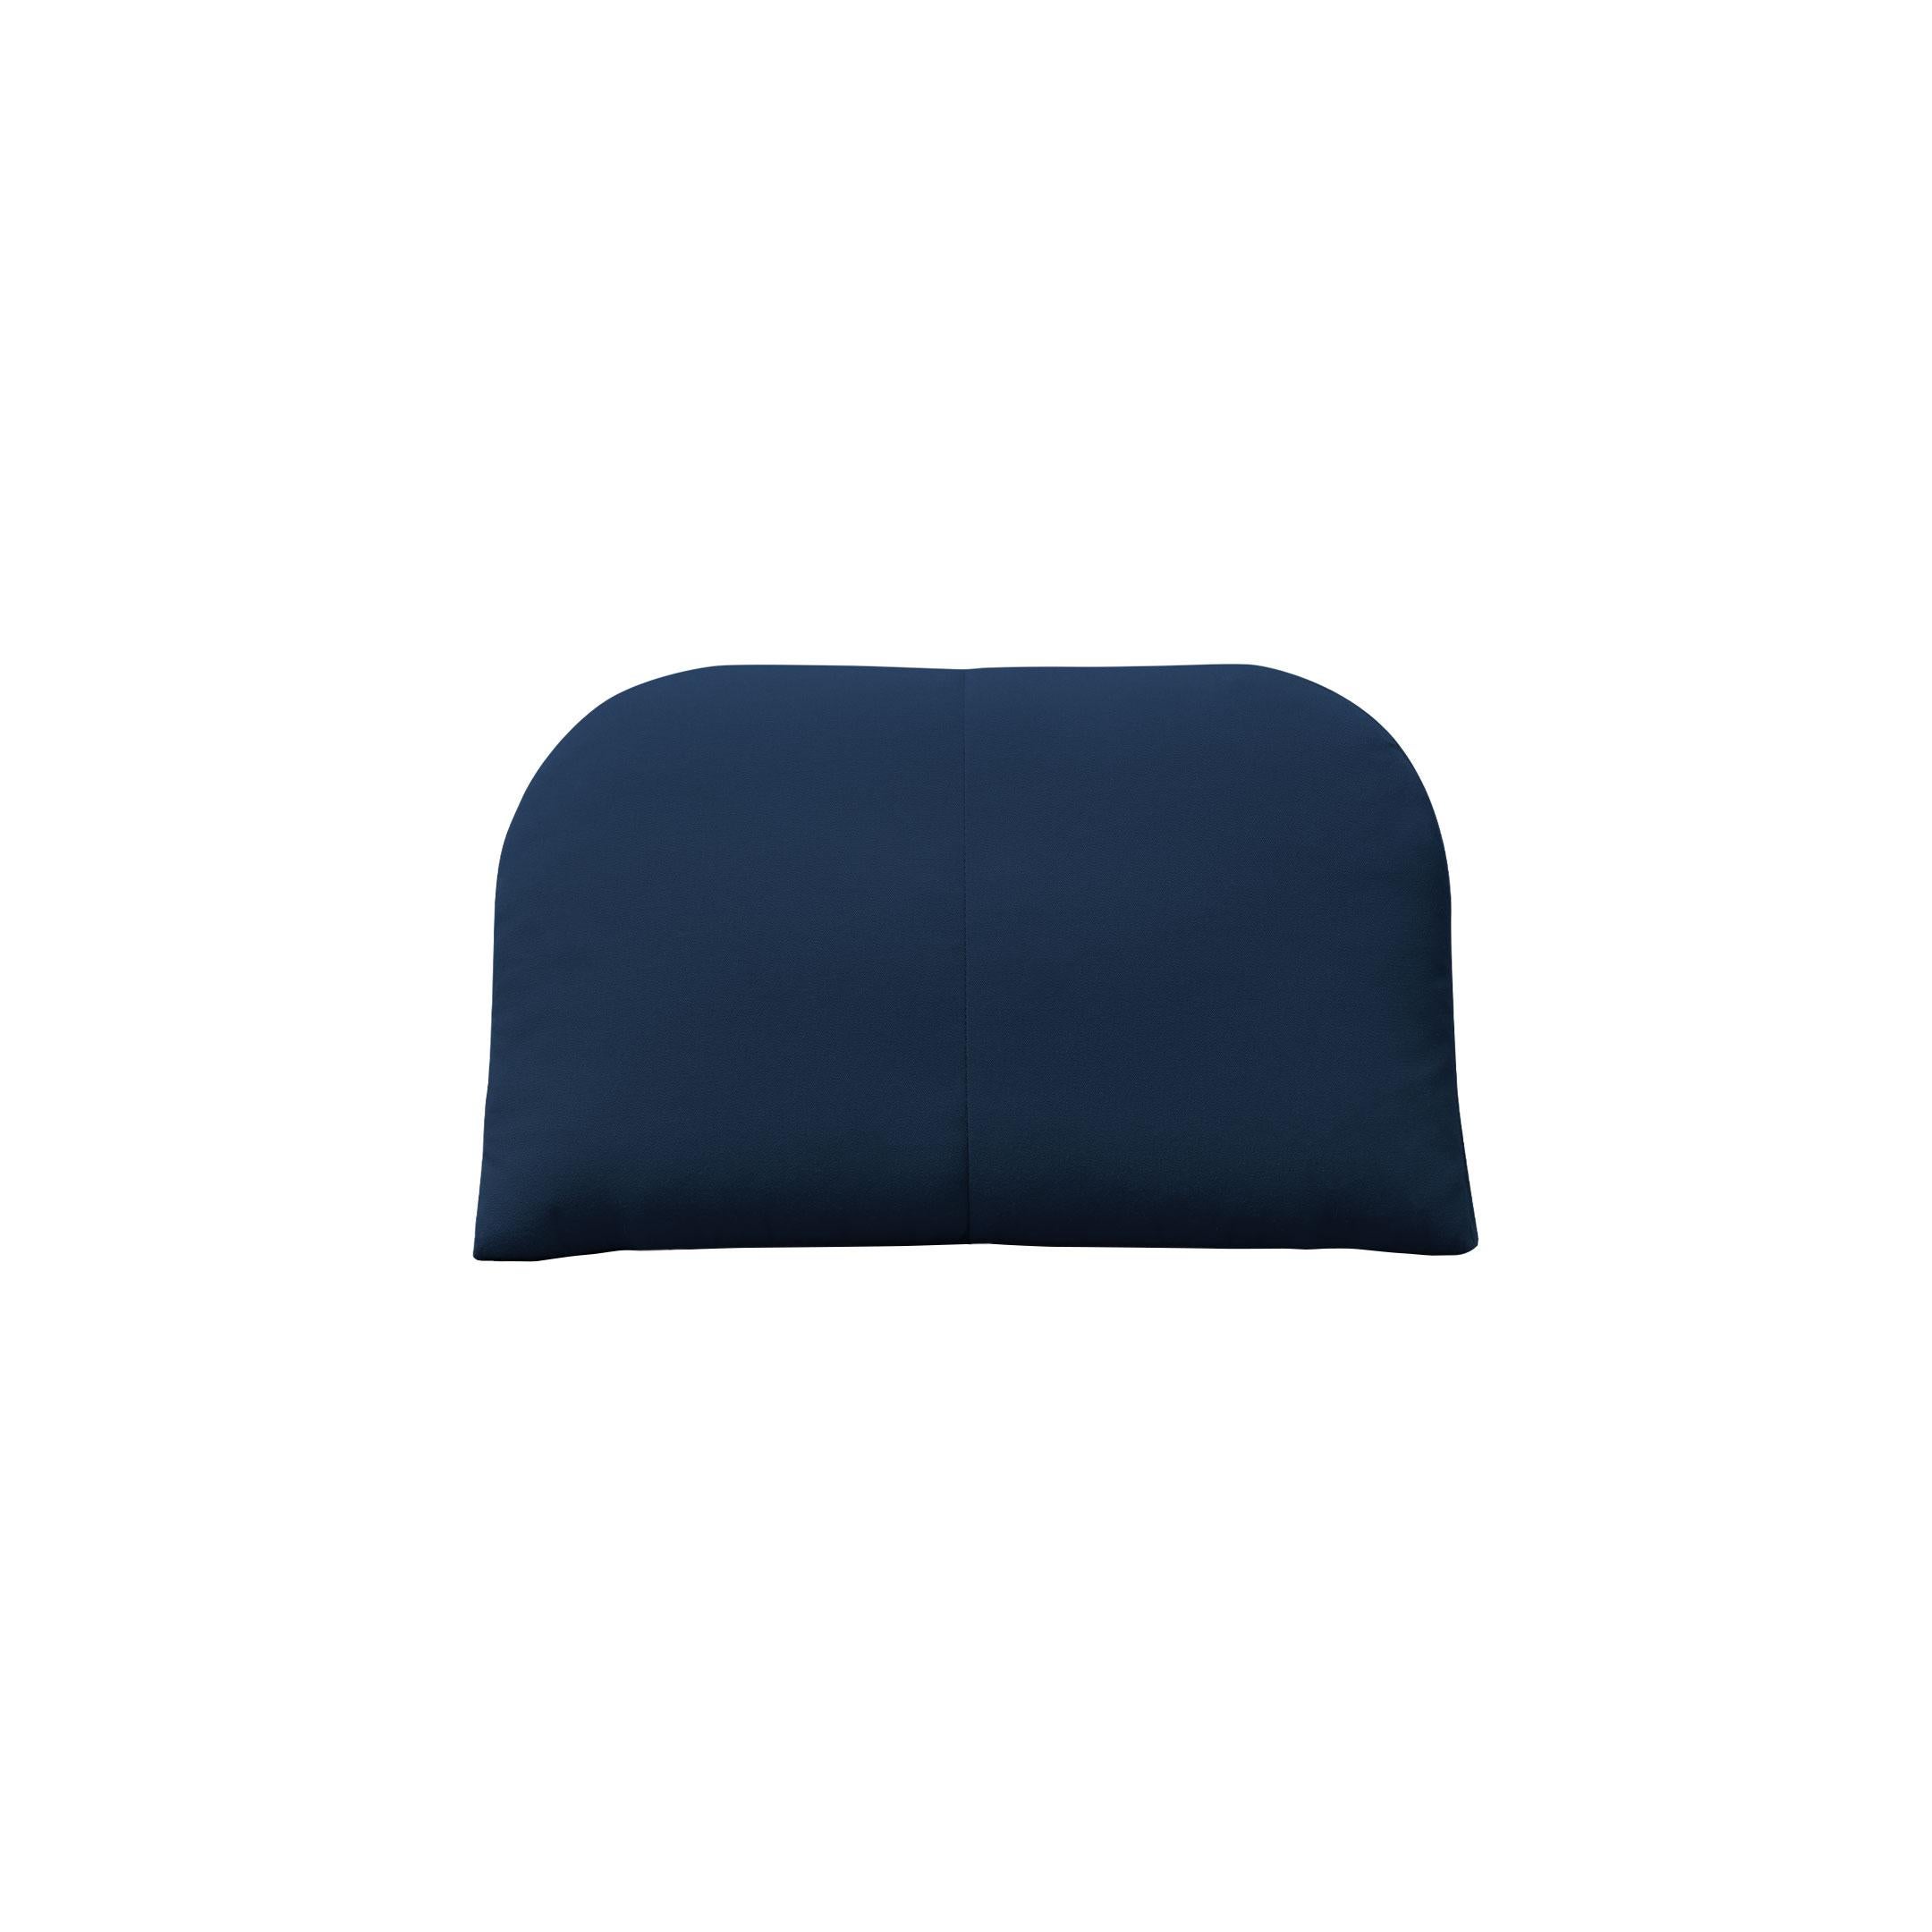 Other Bend Goods - Arc Throw Pillow in True Blue Sunbrella For Sale